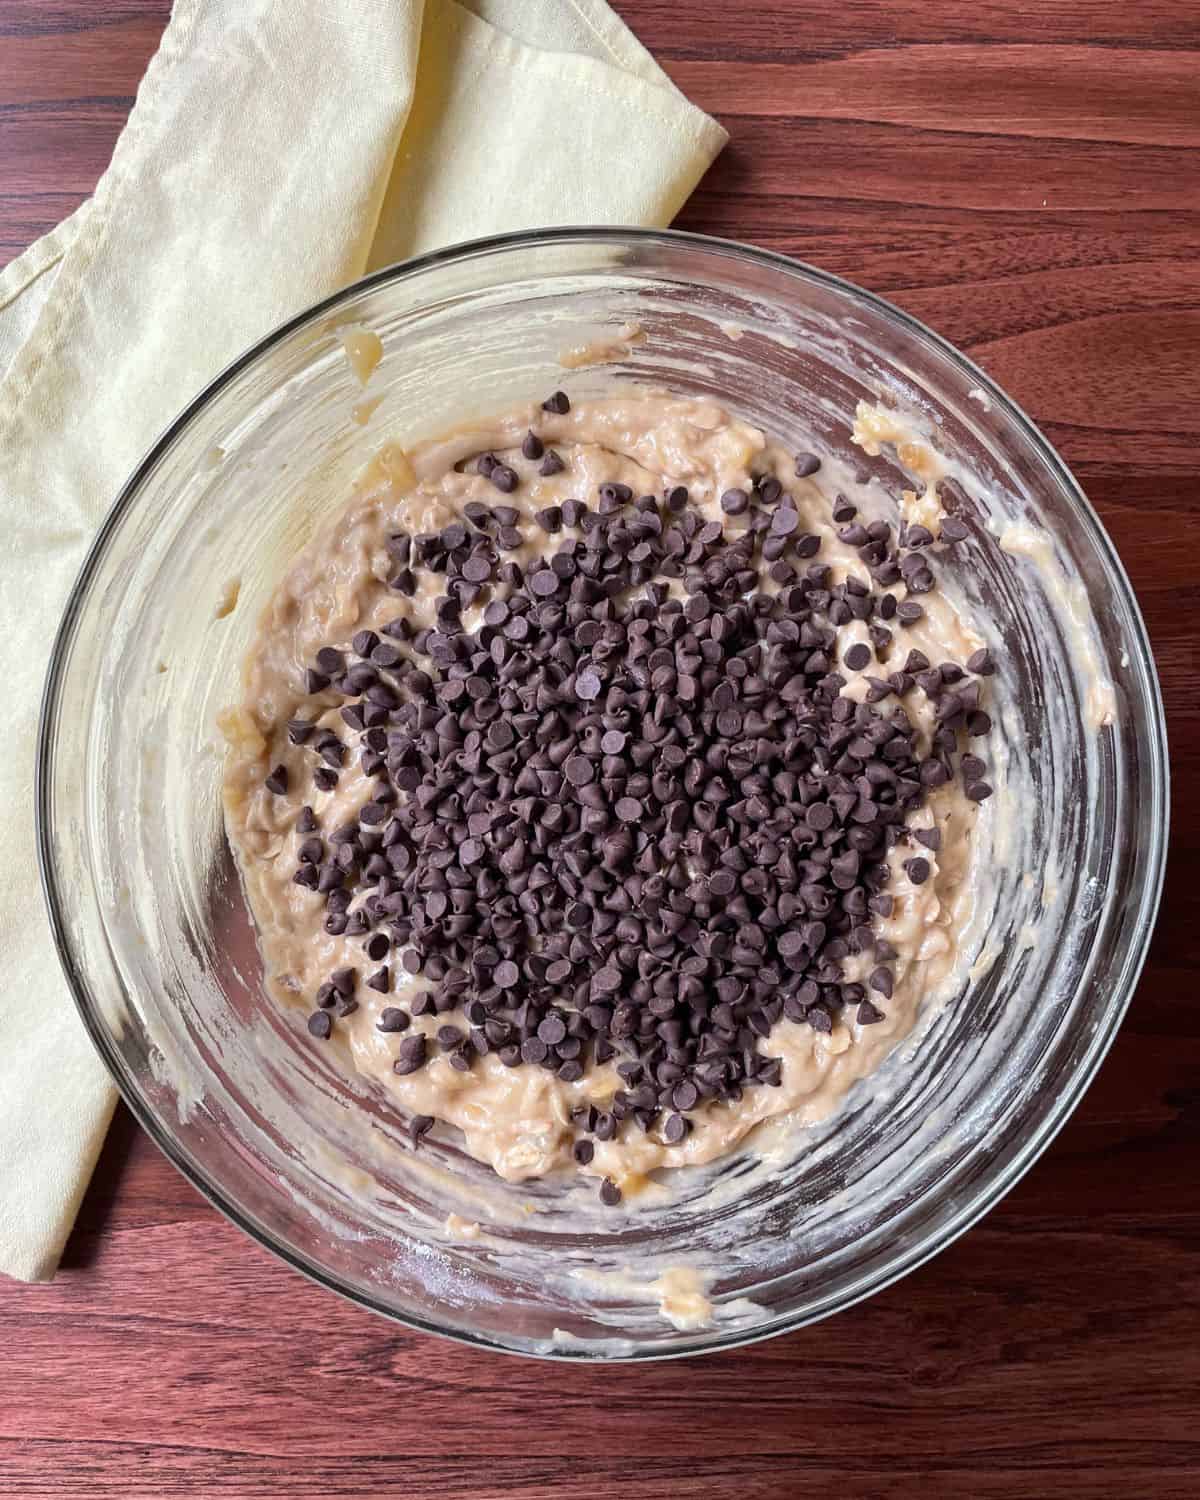 Mini chocolate chips are added to the mixed ingredients in a glass bowl.